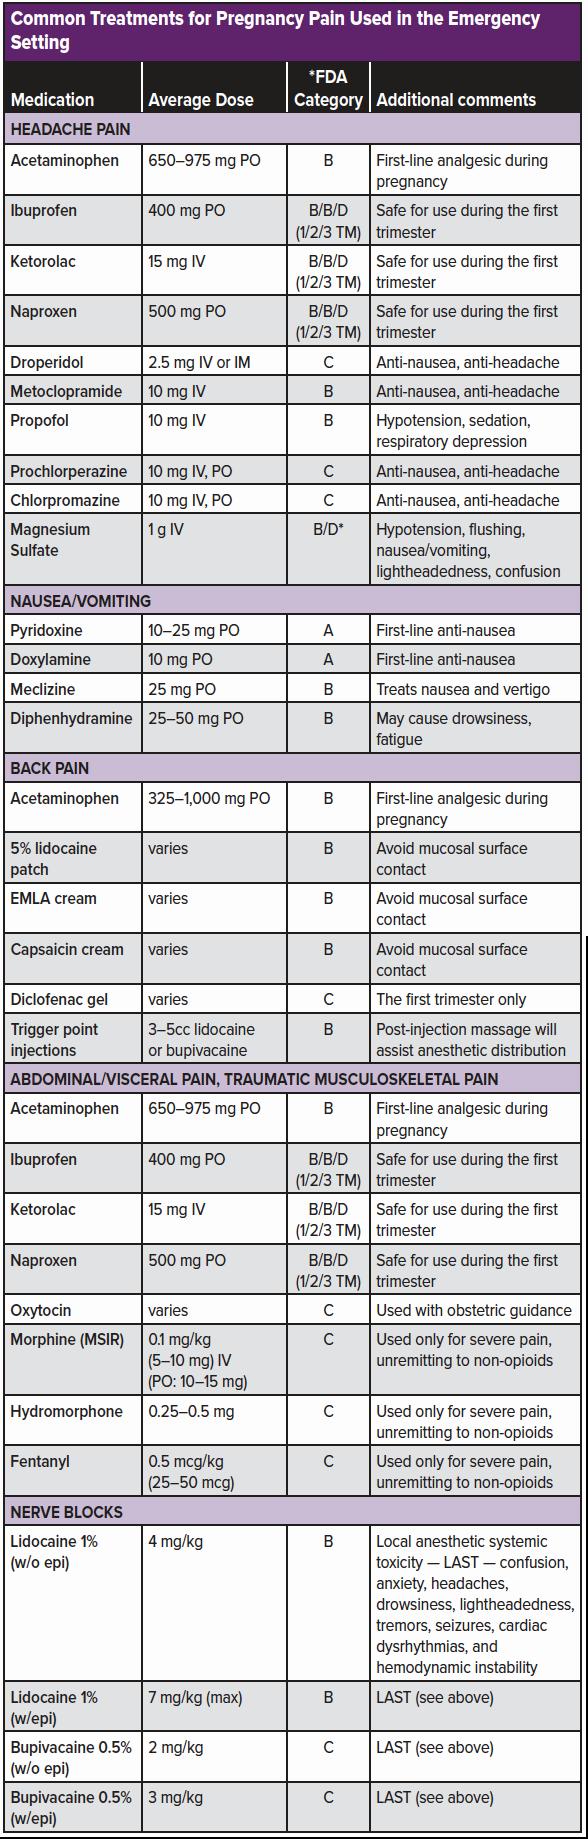 A table of common treatments for pregnancy pain used in the emergency setting, including medication, average dose, category, and additional comments.